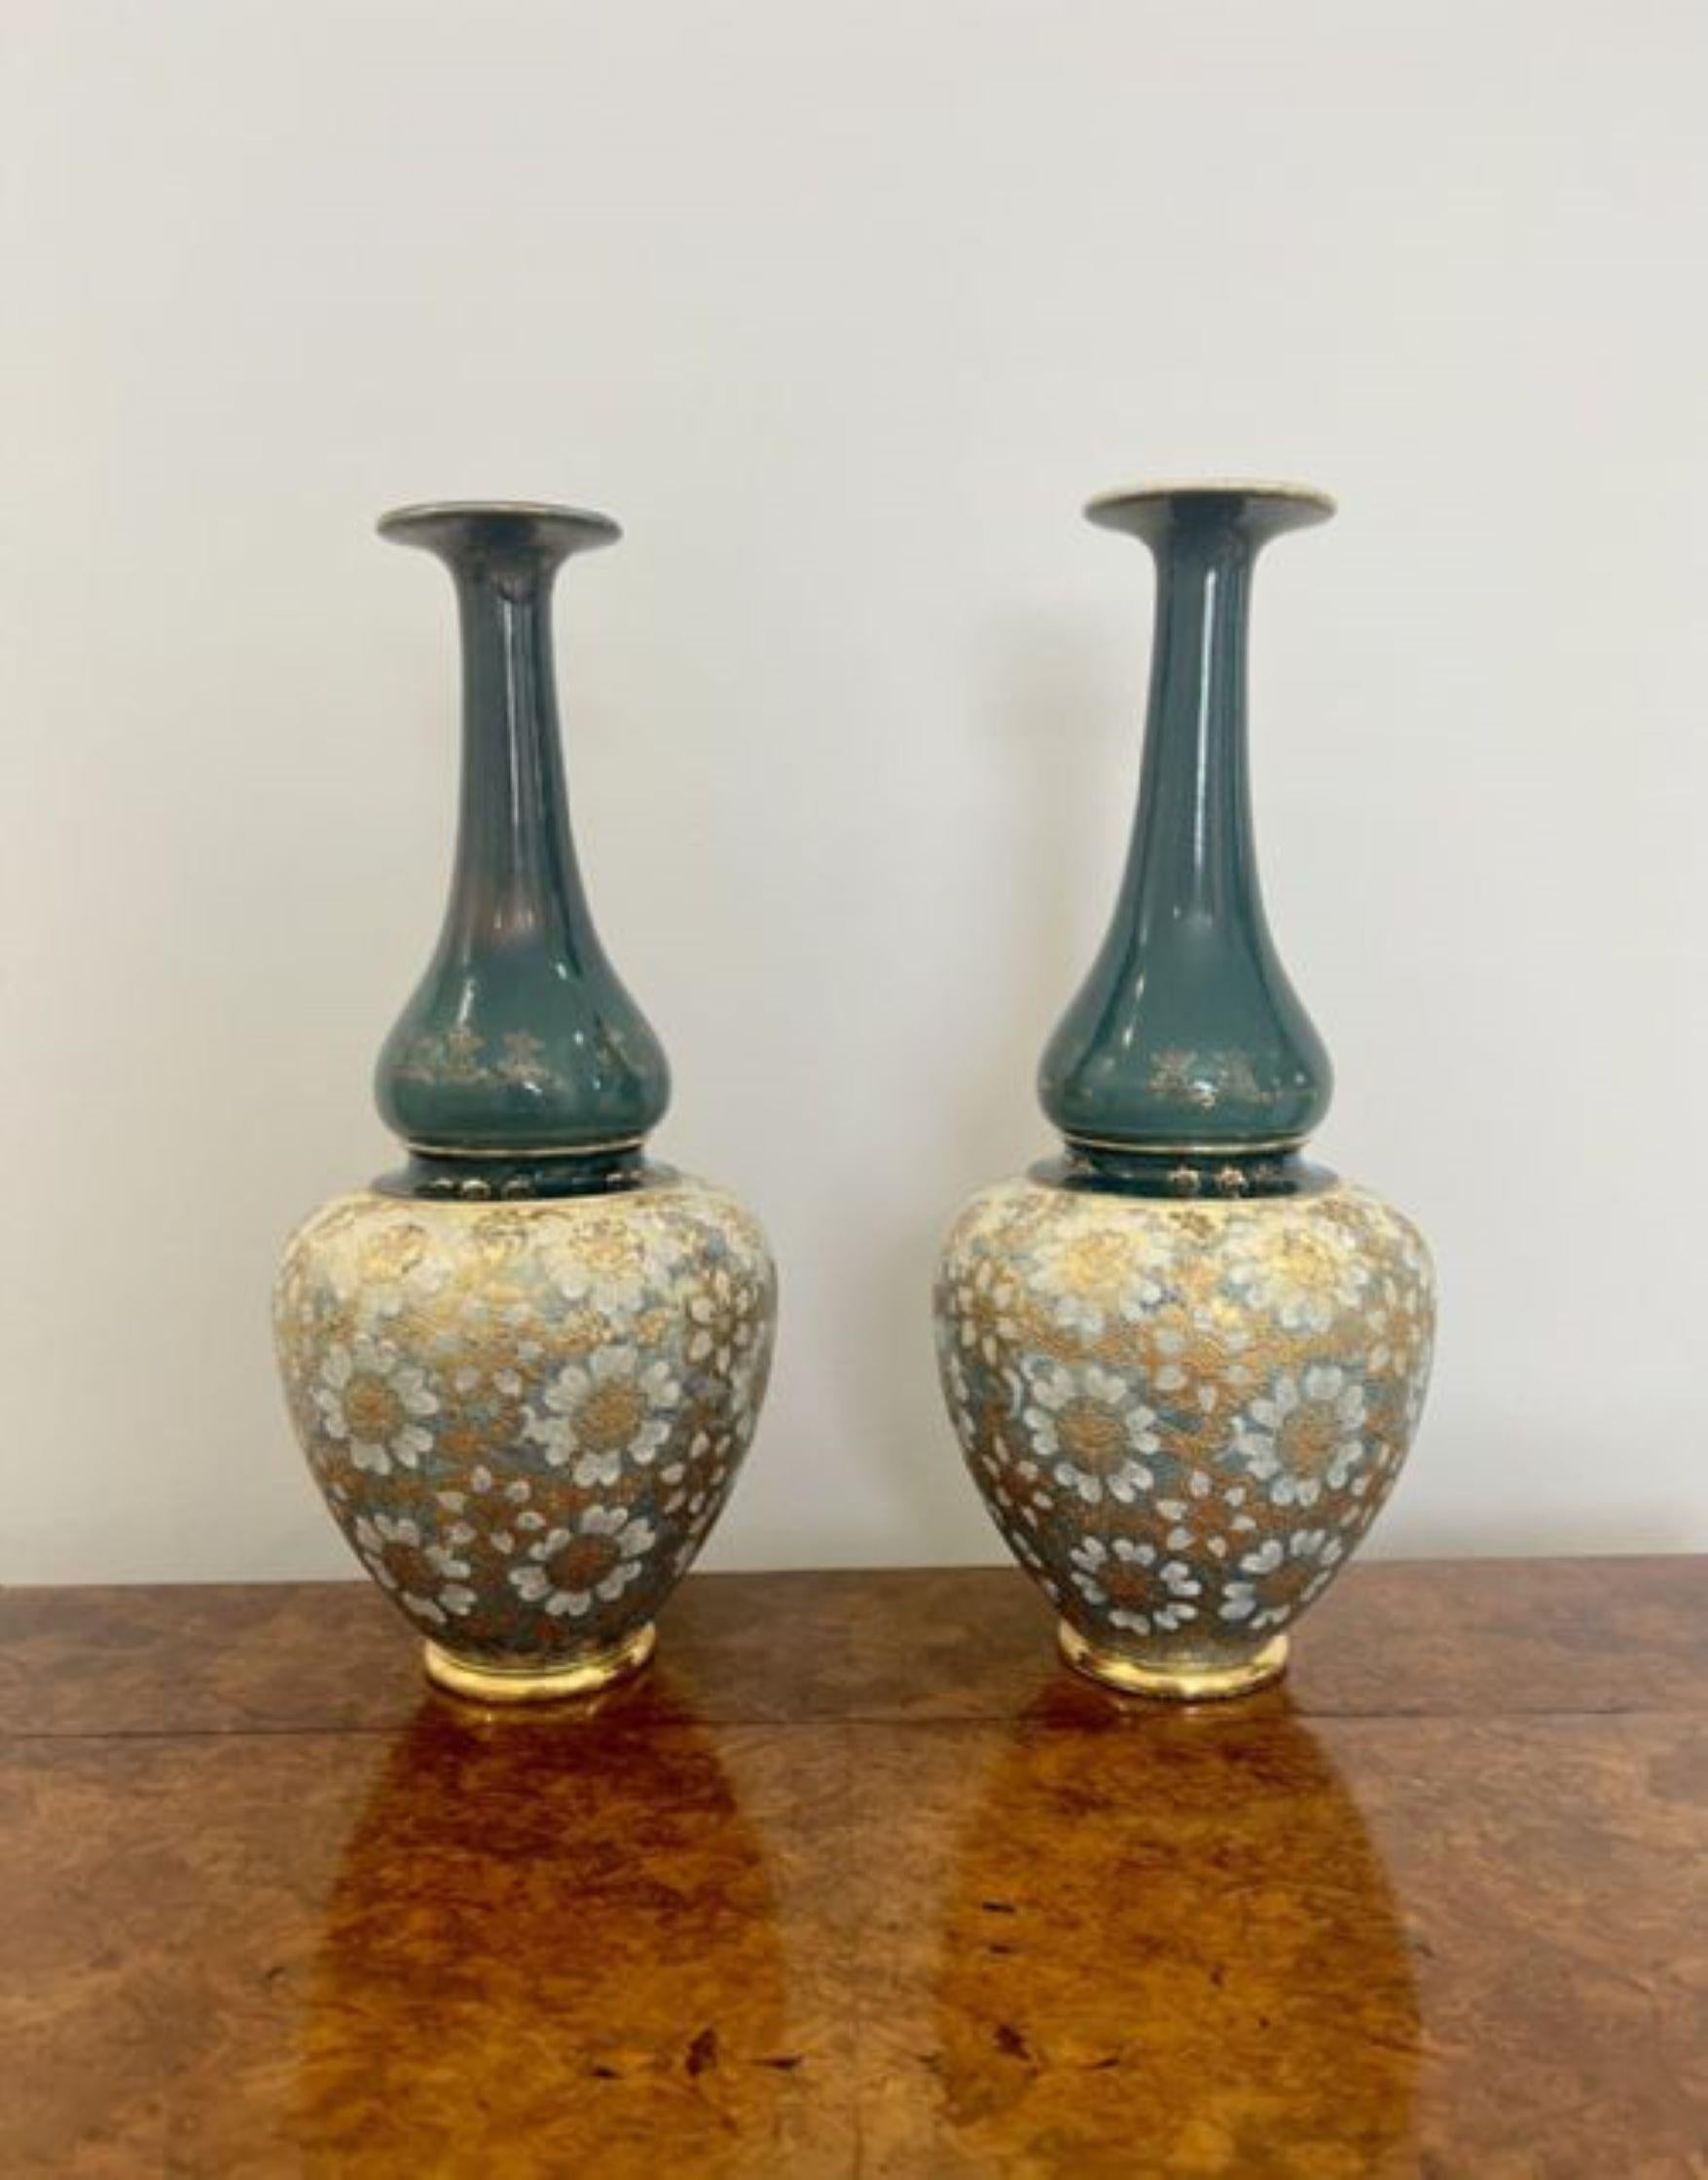 Quality pair of antique Victorian large ballister Royal Doulton vases having a quality pair of antique Royal Doulton shaped vases in wonderful green, gold and white colours with flower decoration standing on circular gilded bases. Markings to the